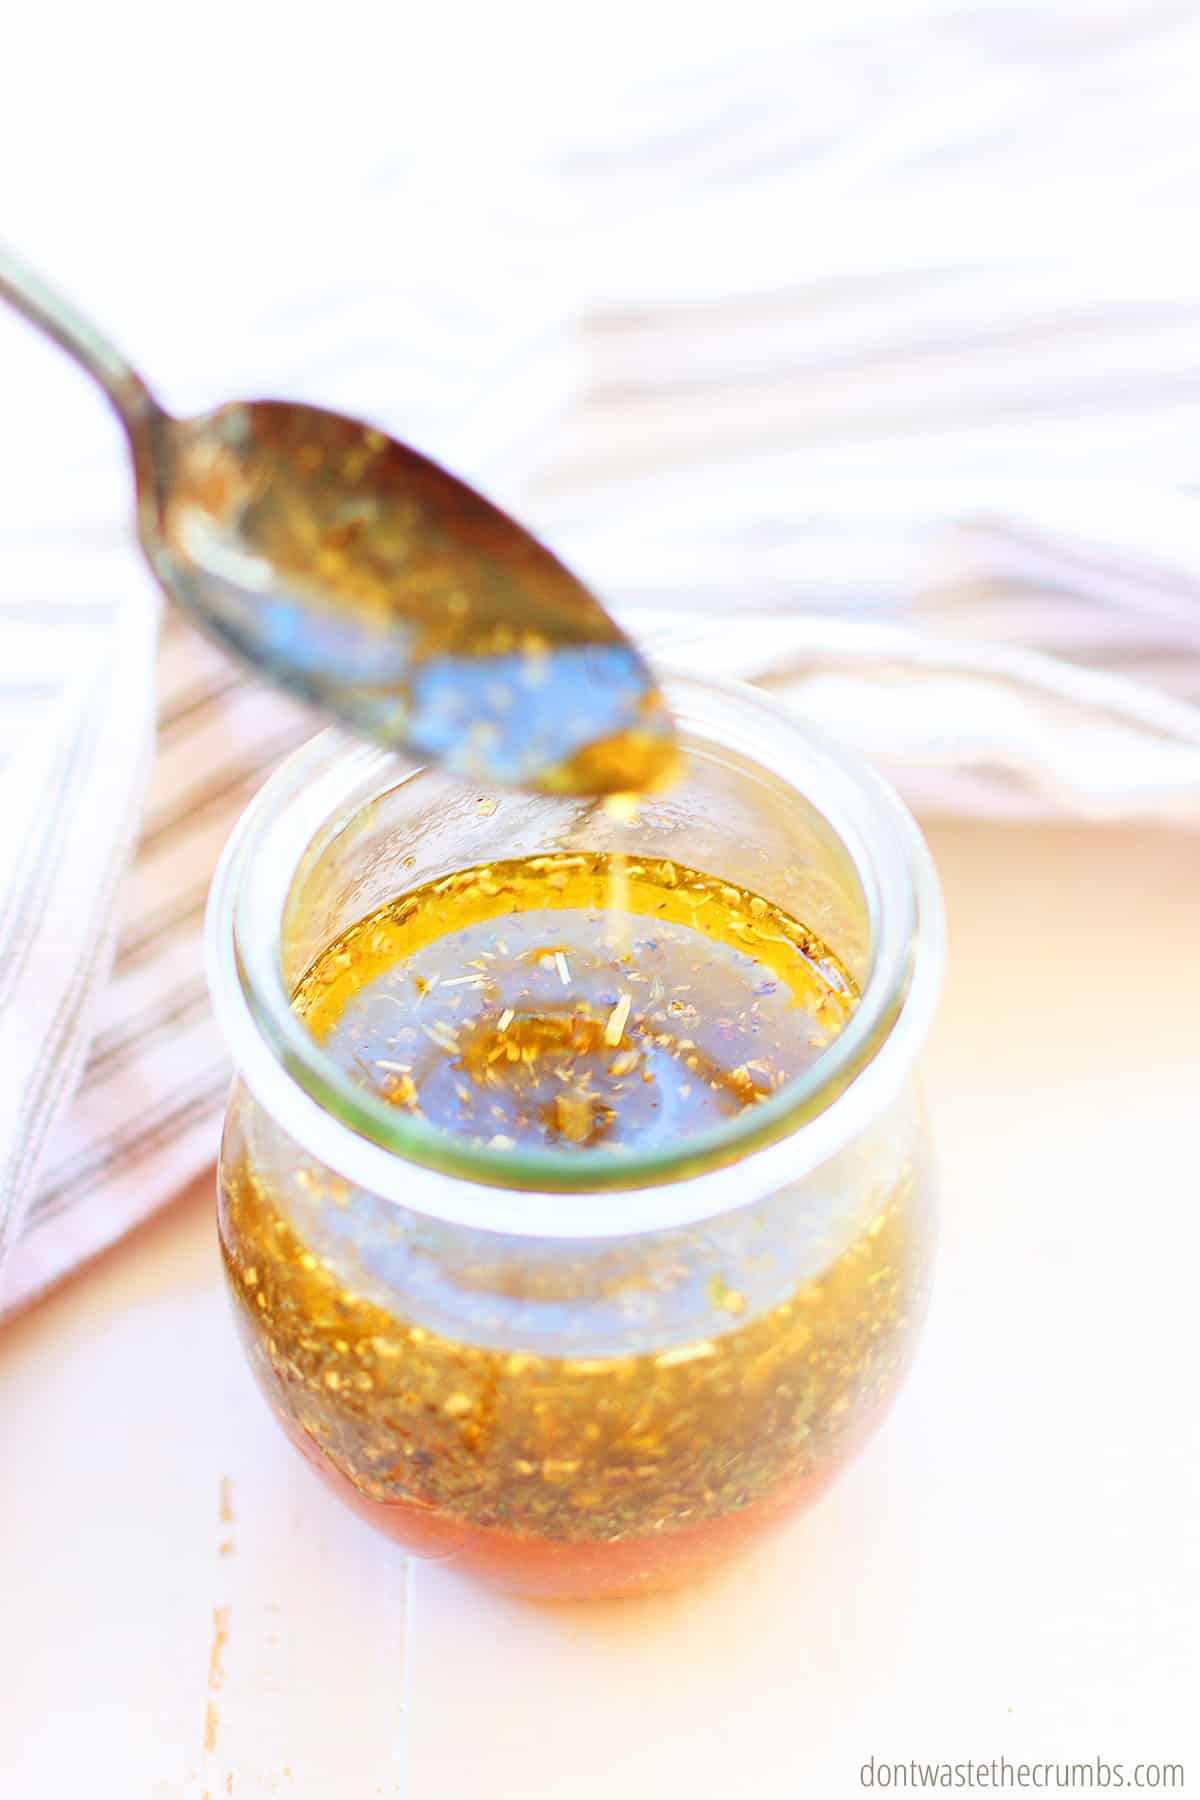 Spoon this healthy and delicious homemade zesty Italian dressing over your salads for the perfect kick to your favorite recipes.